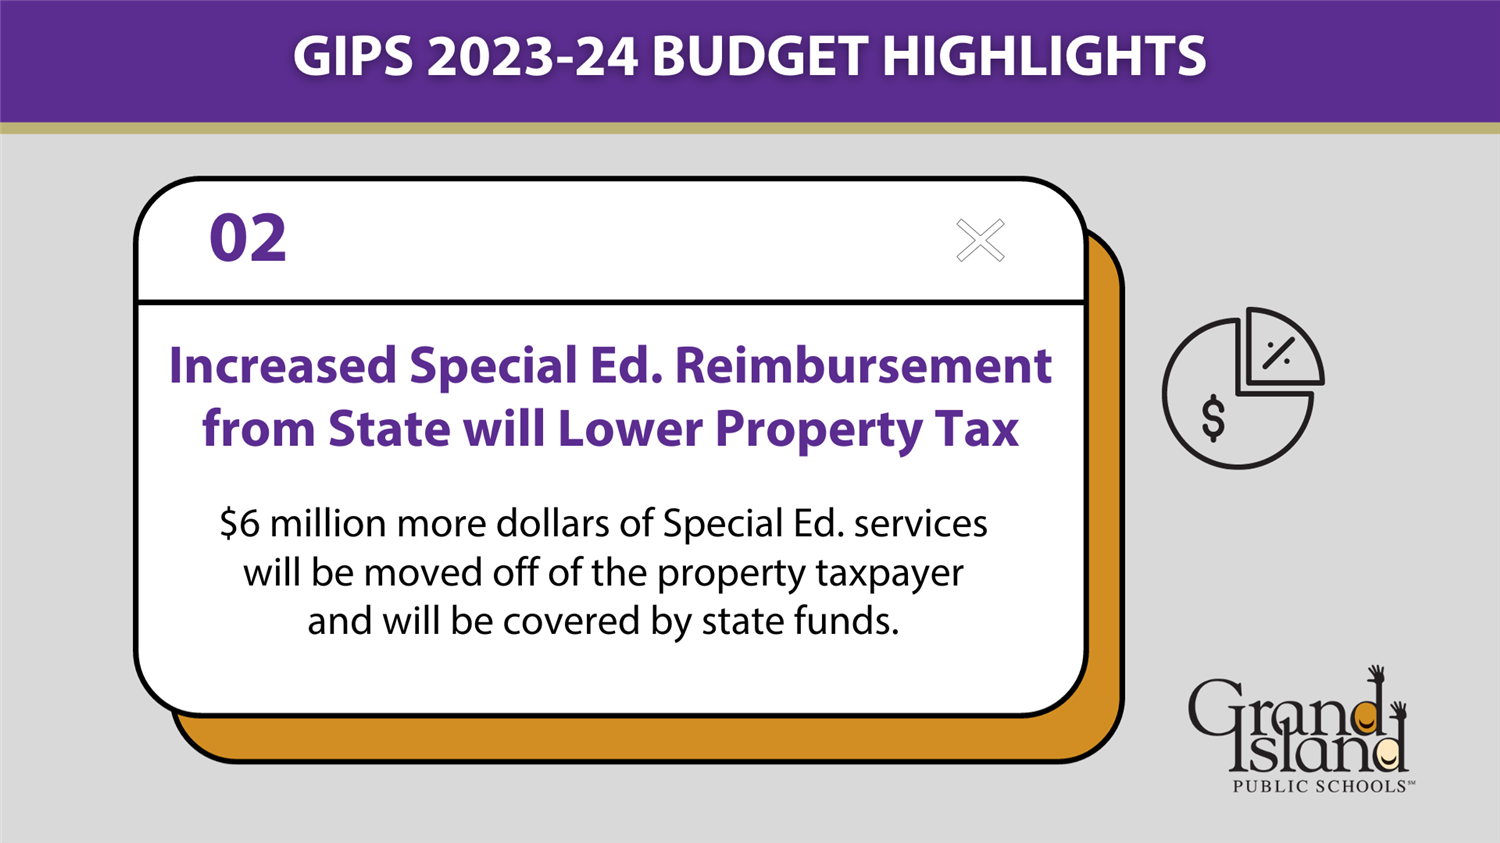 GIPS Budget Highlight Number 02 - Increased Special Ed. Reimbursement from State will Lower Property Tax